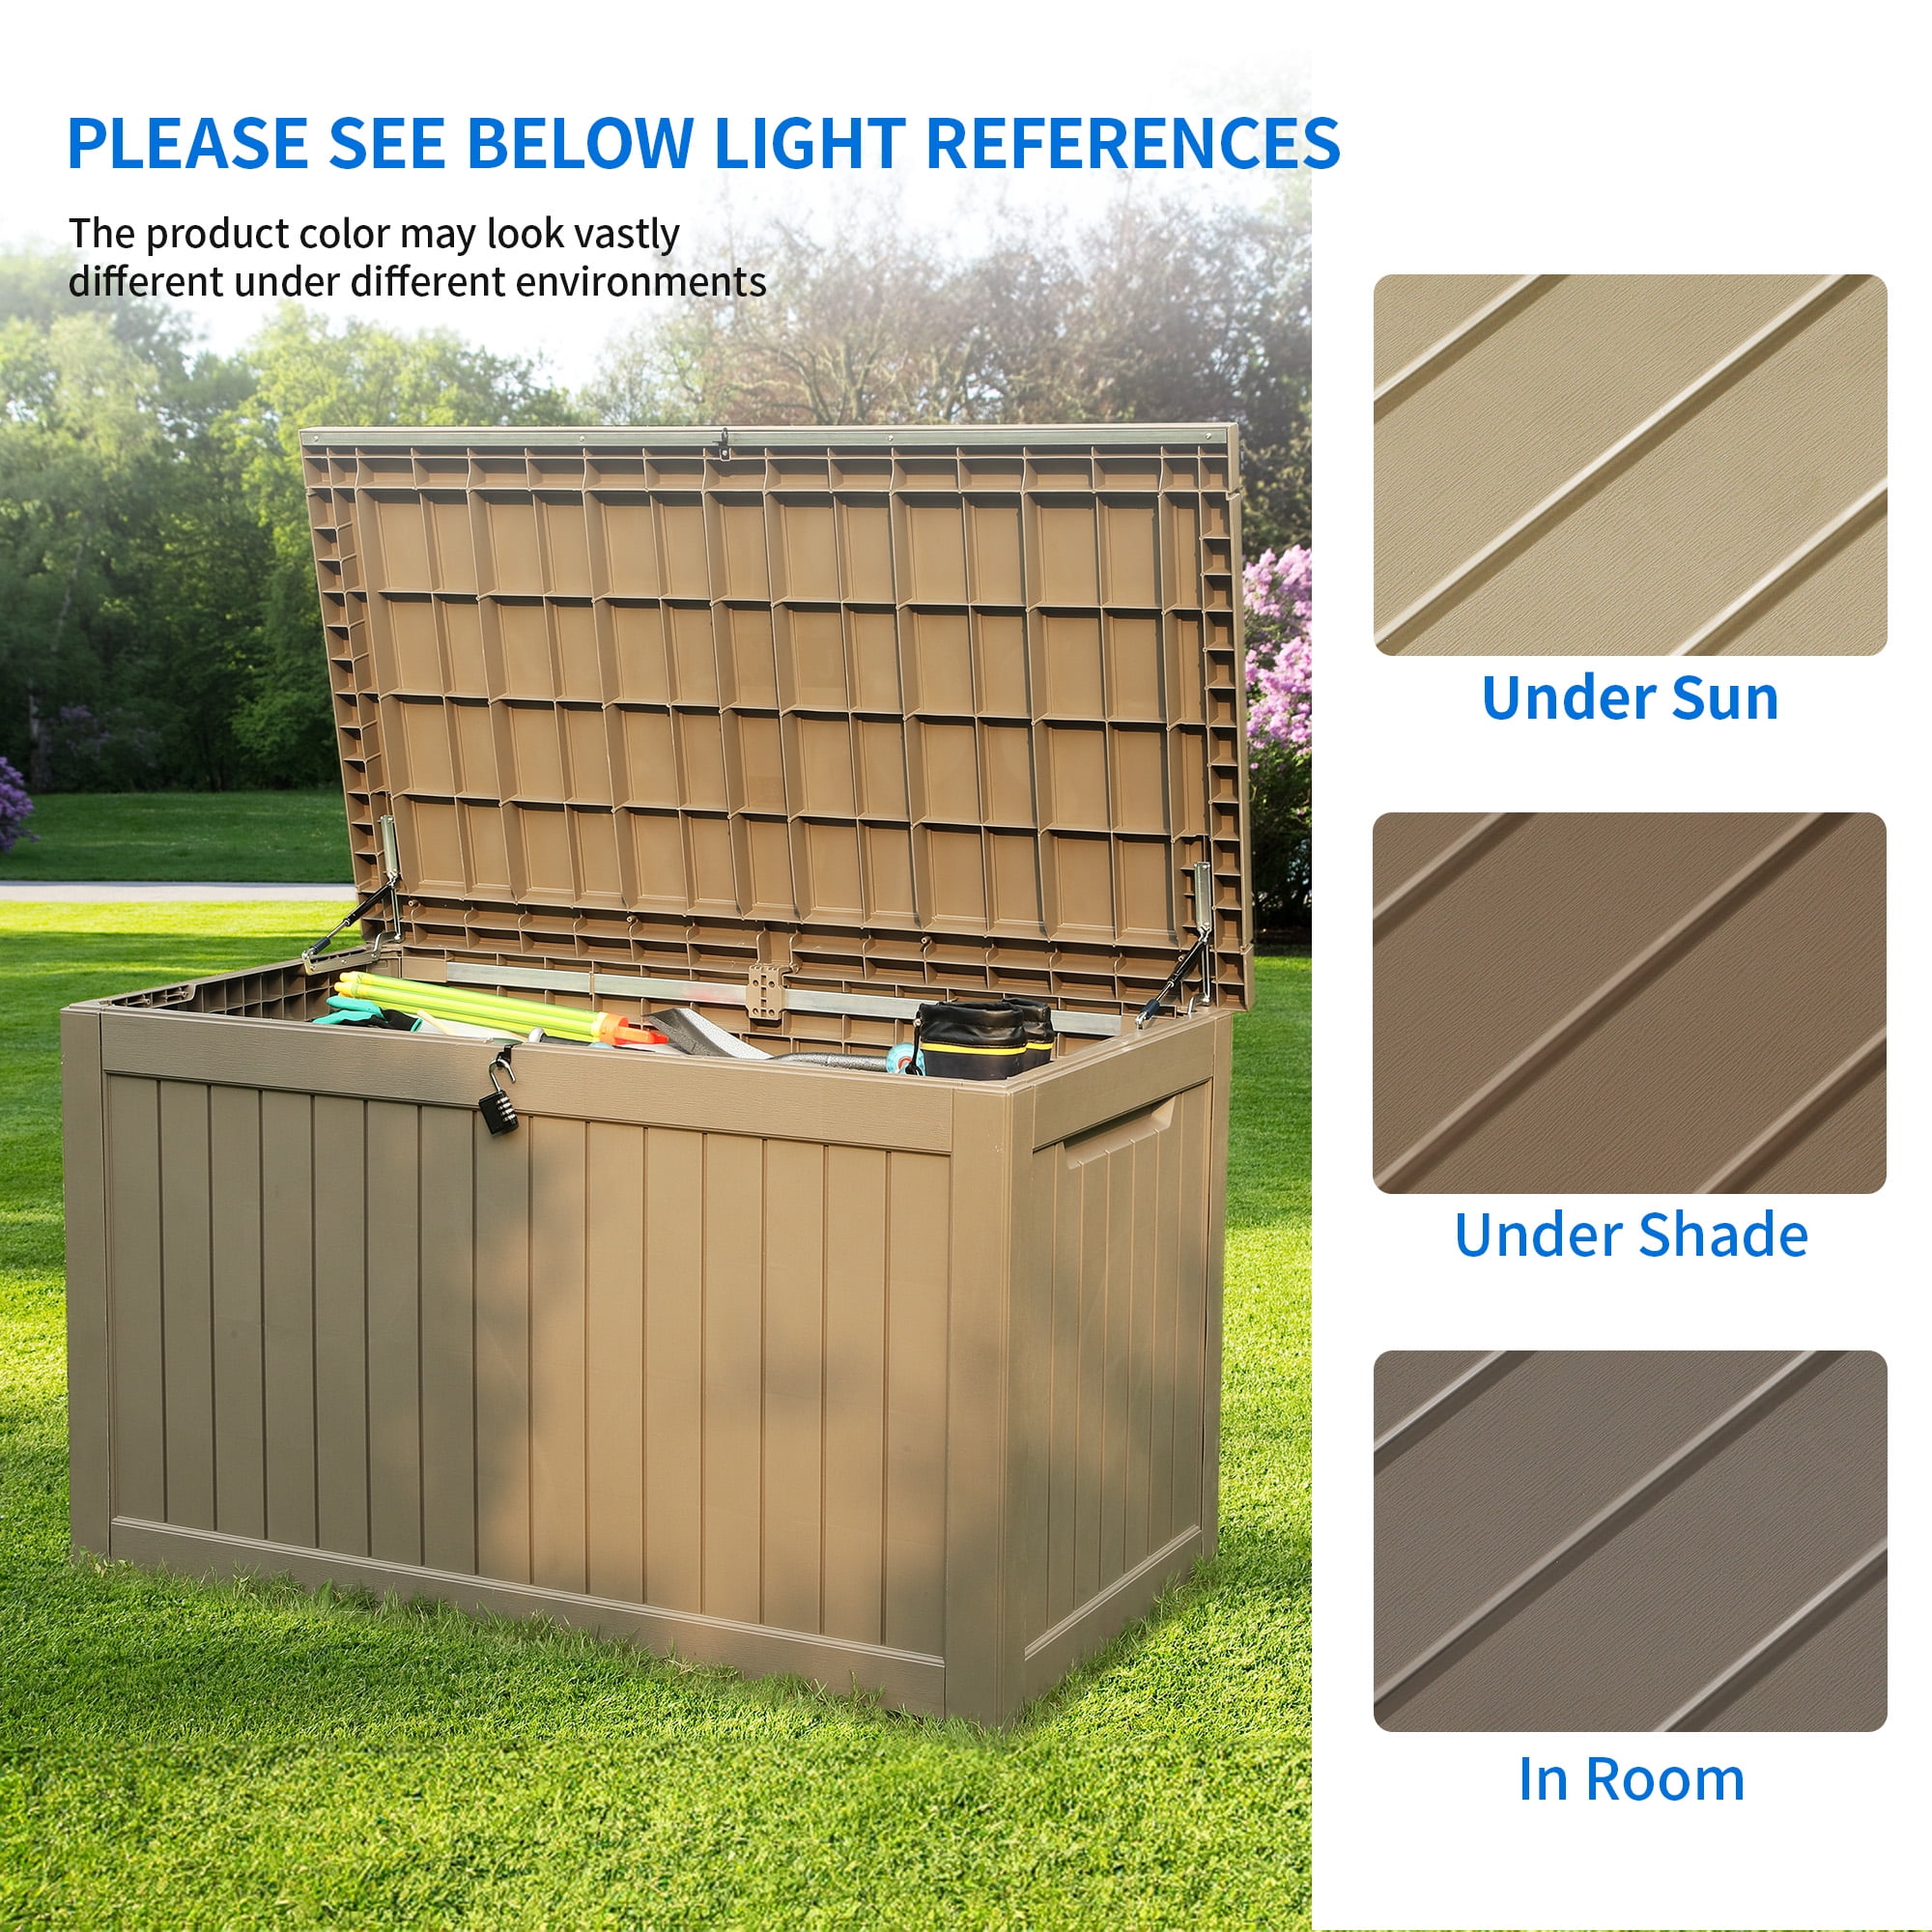 Vineego 230 Gallon Resin Deck Box Large Outdoor Storage for Patio Furniture, Garden Tools, Pool Supplies, Weatherproof and UV Resistant, Light Brown